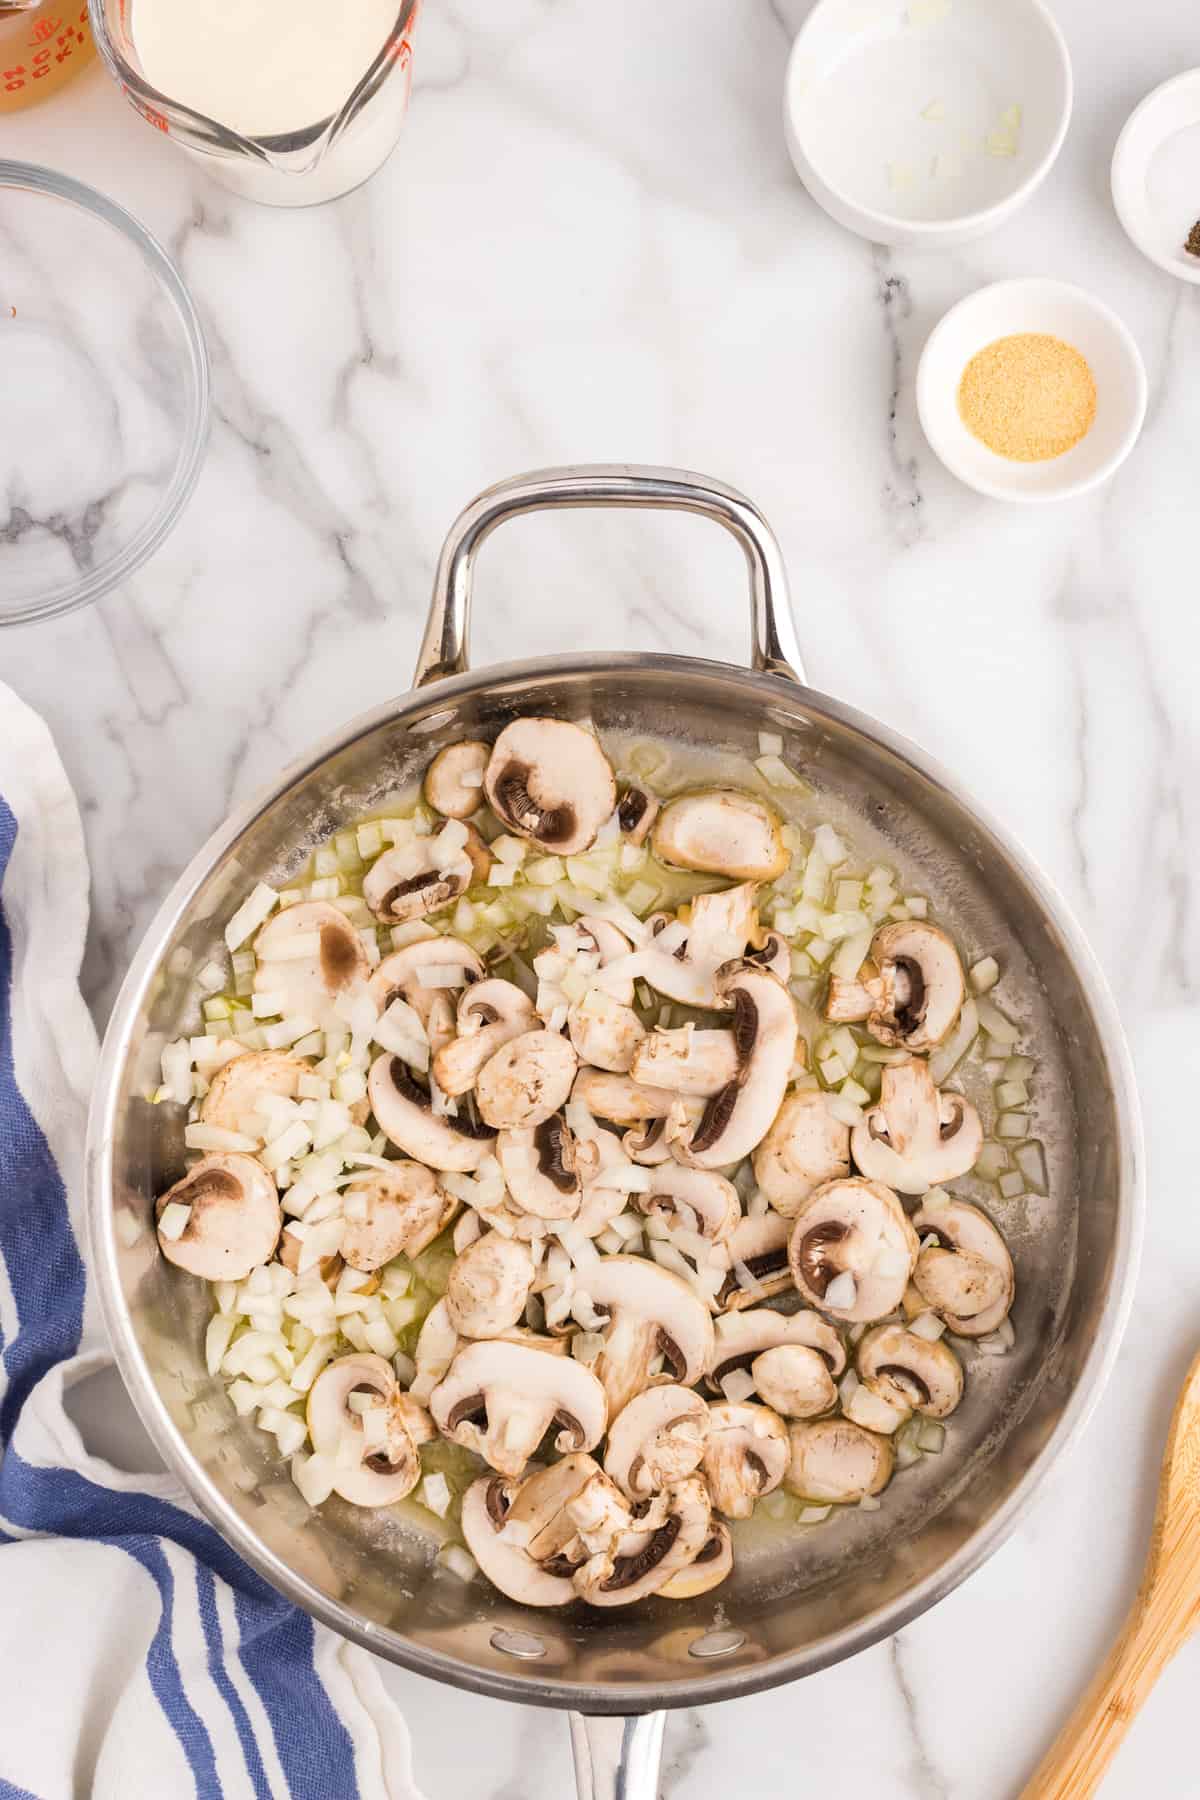 Cooking onion and mushrooms in buttered stovetop skillet for Chicken ala King recipe